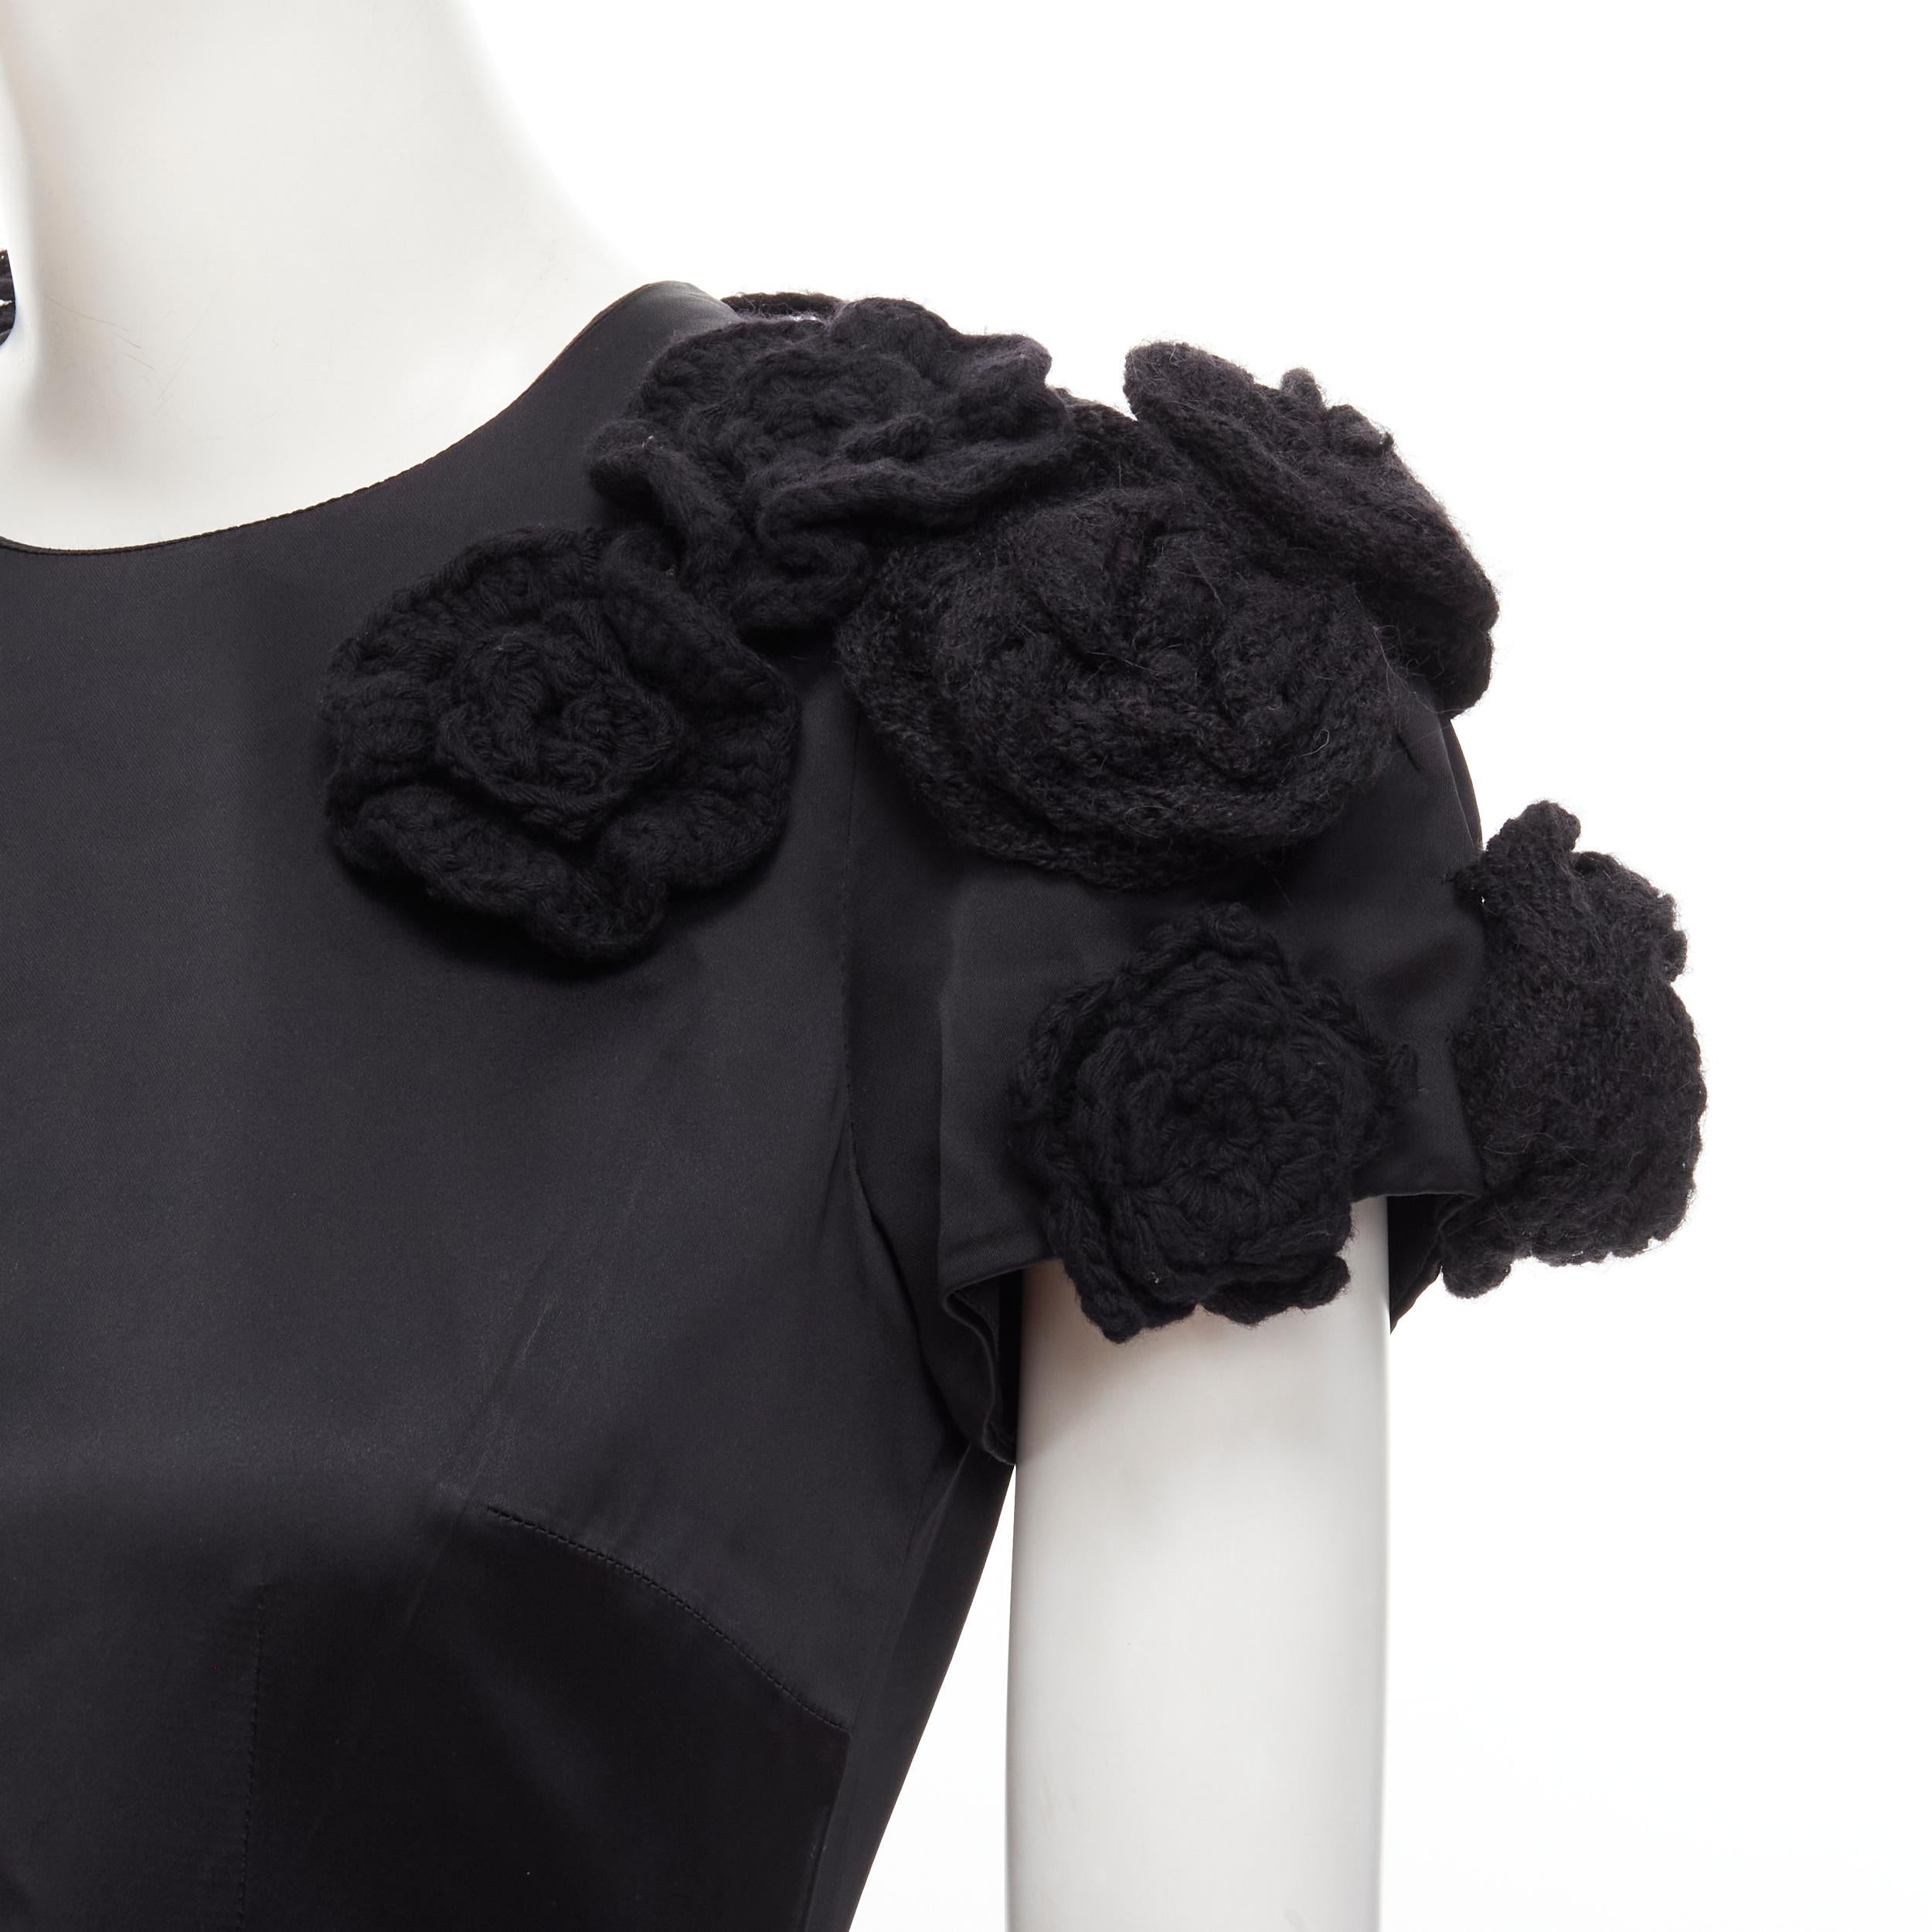 DOLCE GABBANA black 3D wool flower applique lace trimmed dress IT38 XS 
Reference: TGAS/C01076 
Brand: Dolce Gabbana 
Material: Viscose 
Color: Black 
Pattern: Solid 
Closure: Zip 
Extra Detail: Decorative wool knit petal 3D flower appliques. Round